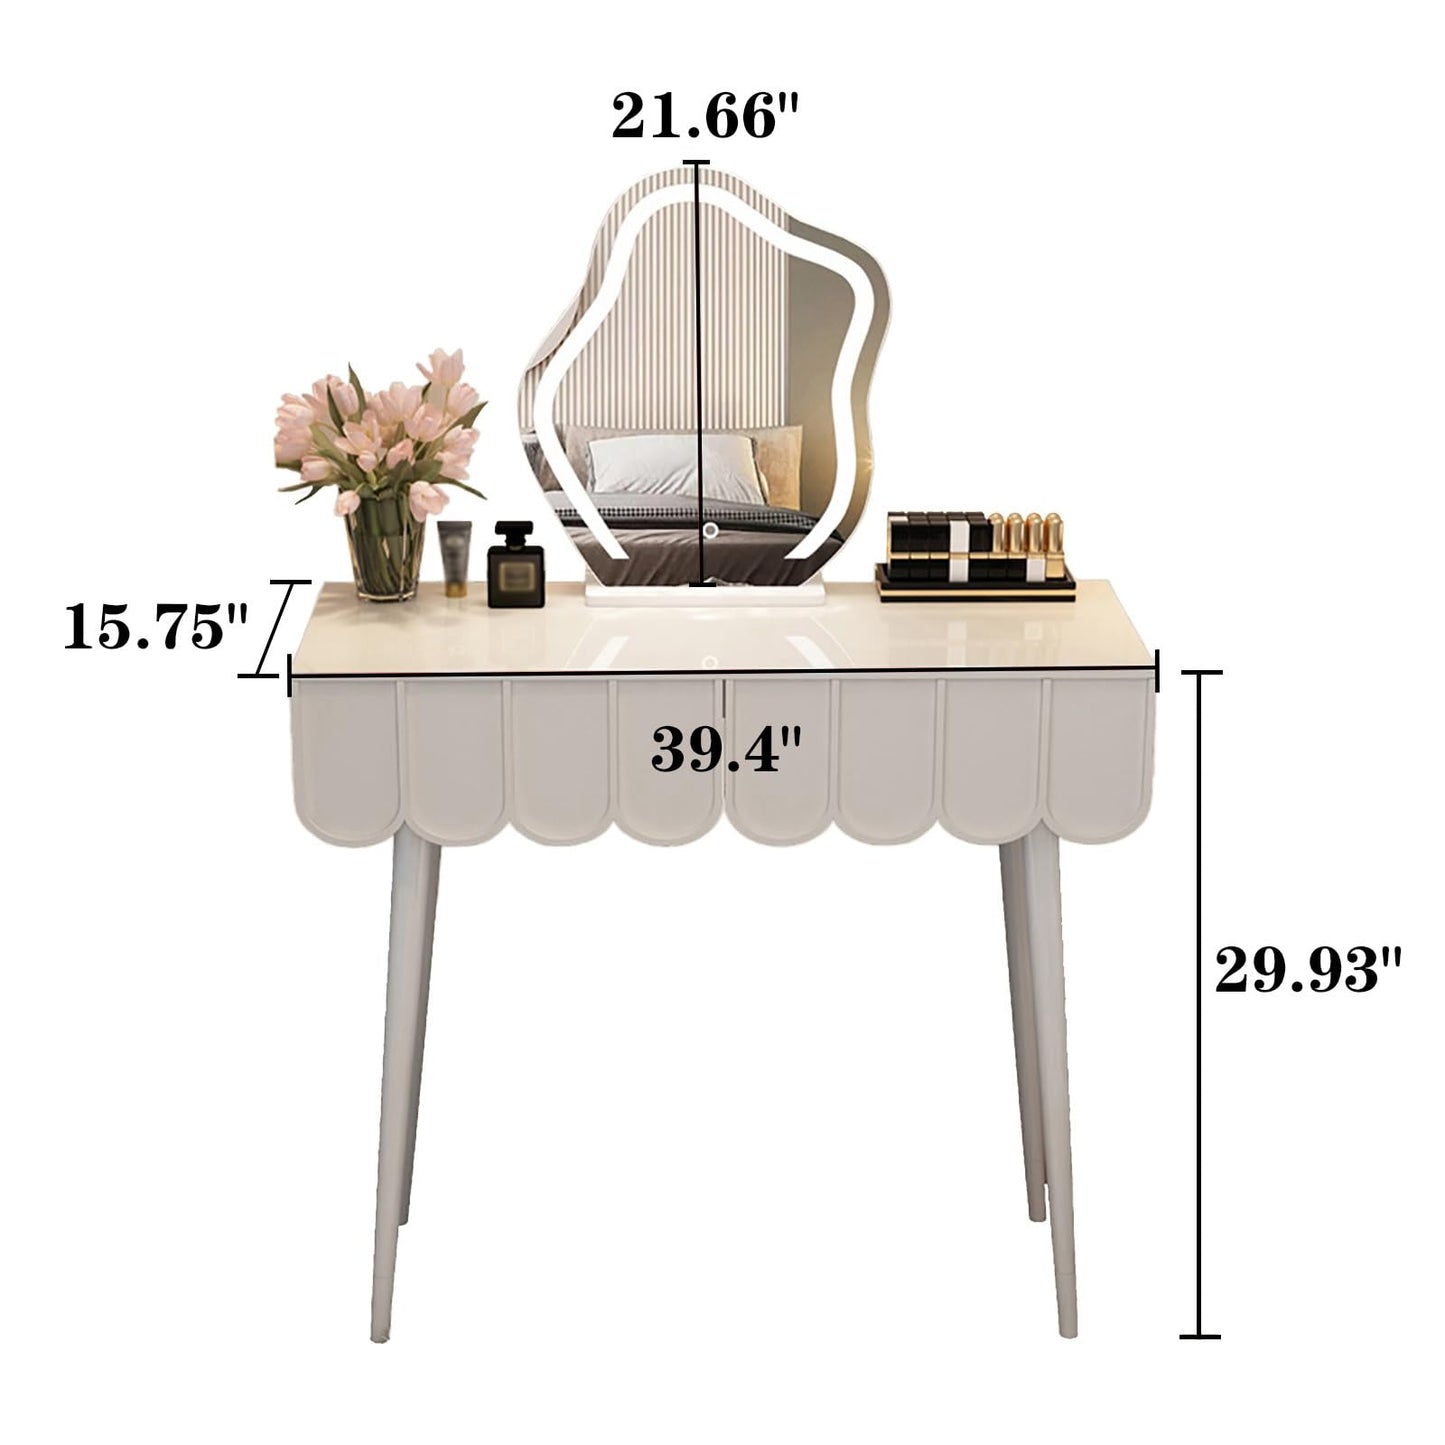 39.4" Makeup Vanity with Lights and Drawers Large-Capacity Storage Space Zoned Storage Vanity Table Set with Mirror High-Definition Mirror Clear